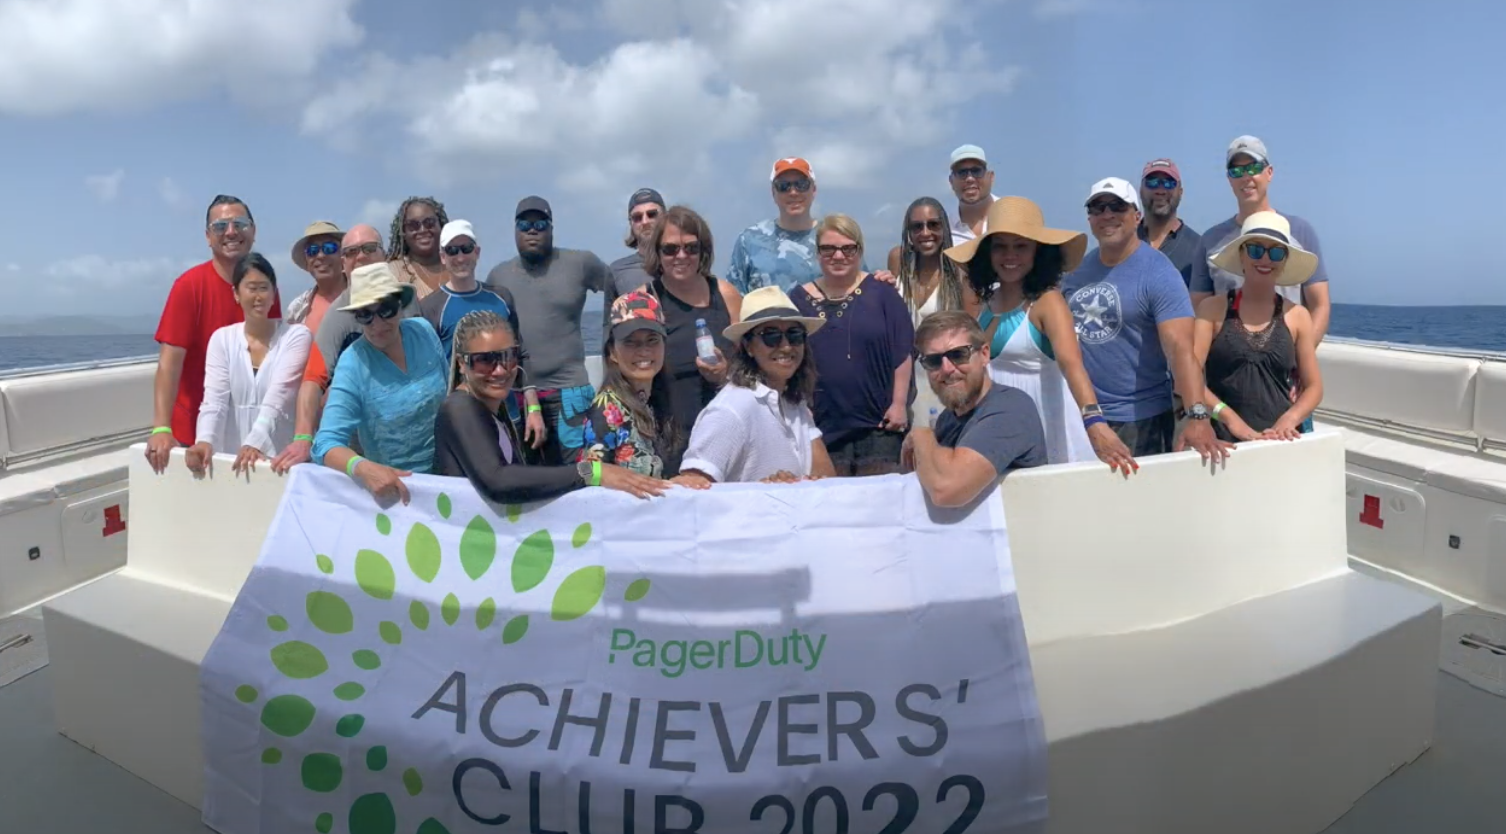 PagerDuty employees on a boat excursion